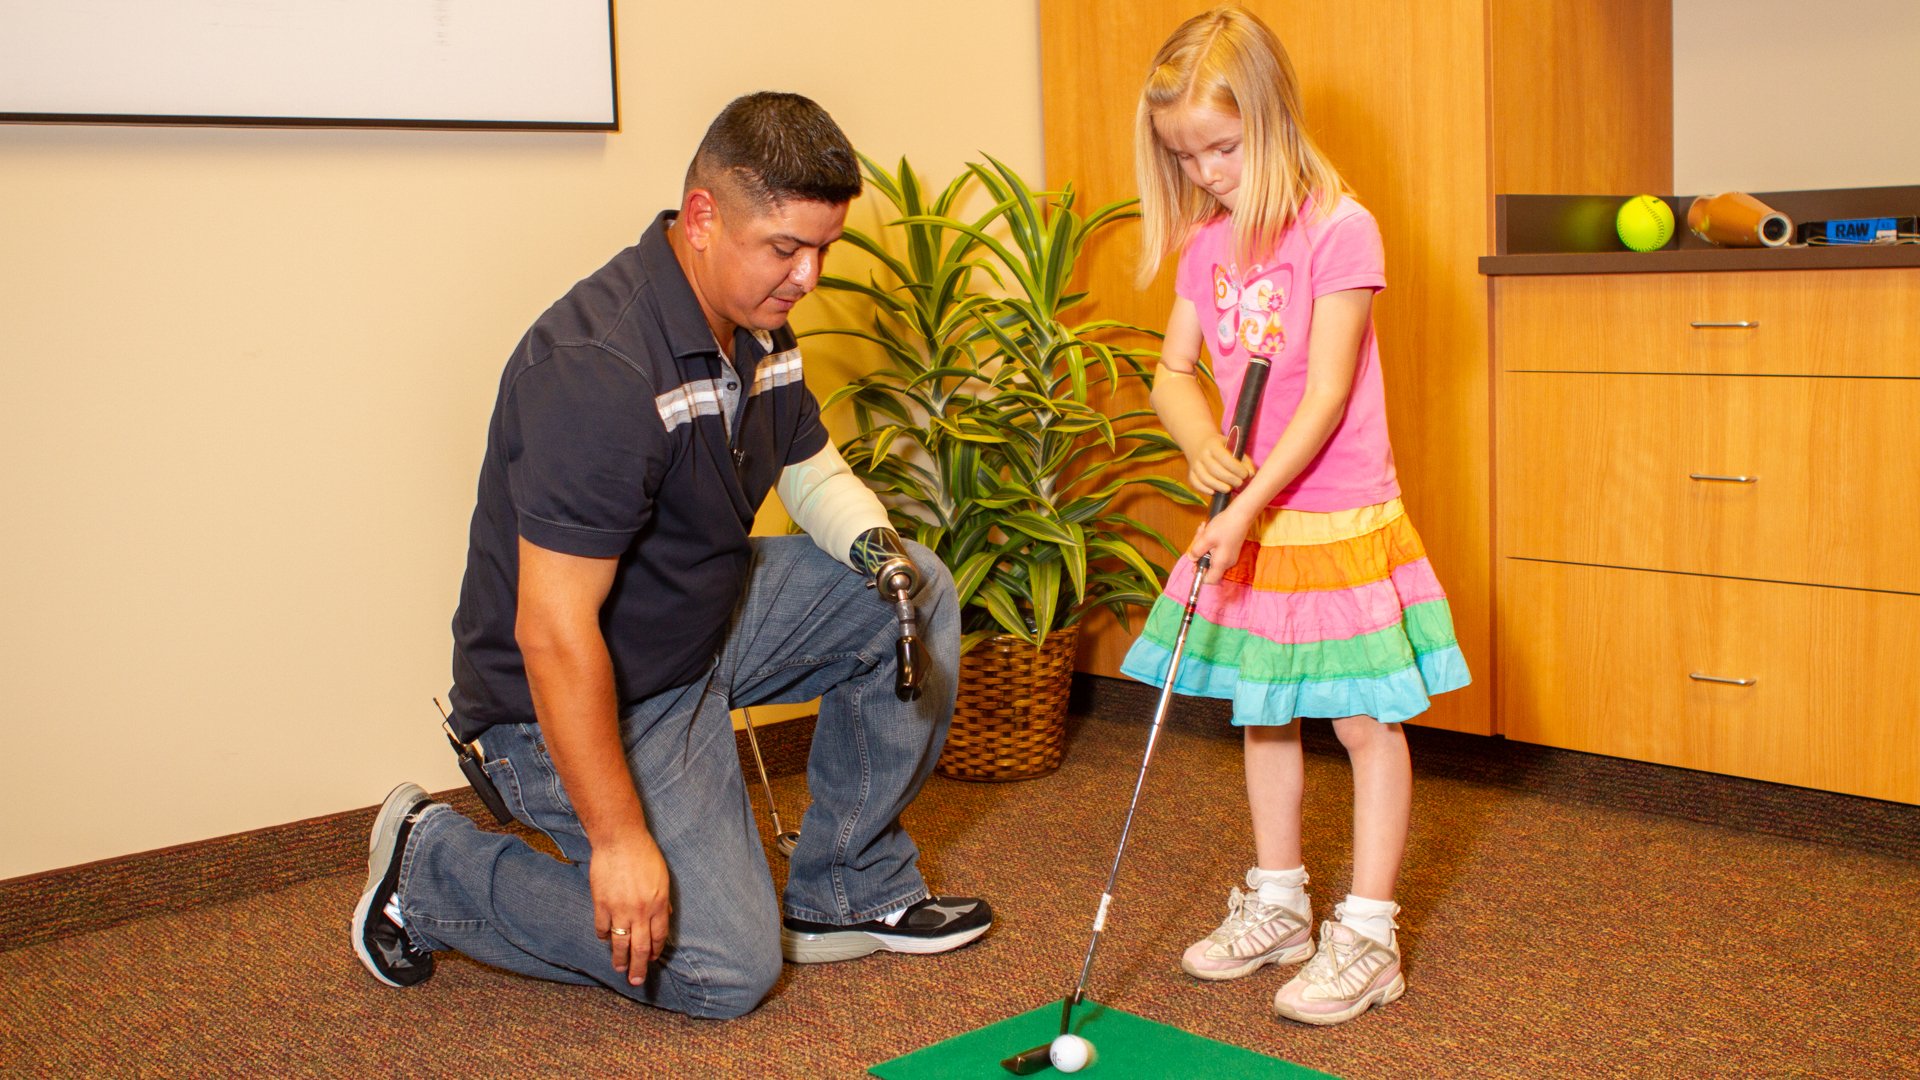 While in town on an event, Ramon Padilla works with pediatric patient Amber Peterson at her golf game.